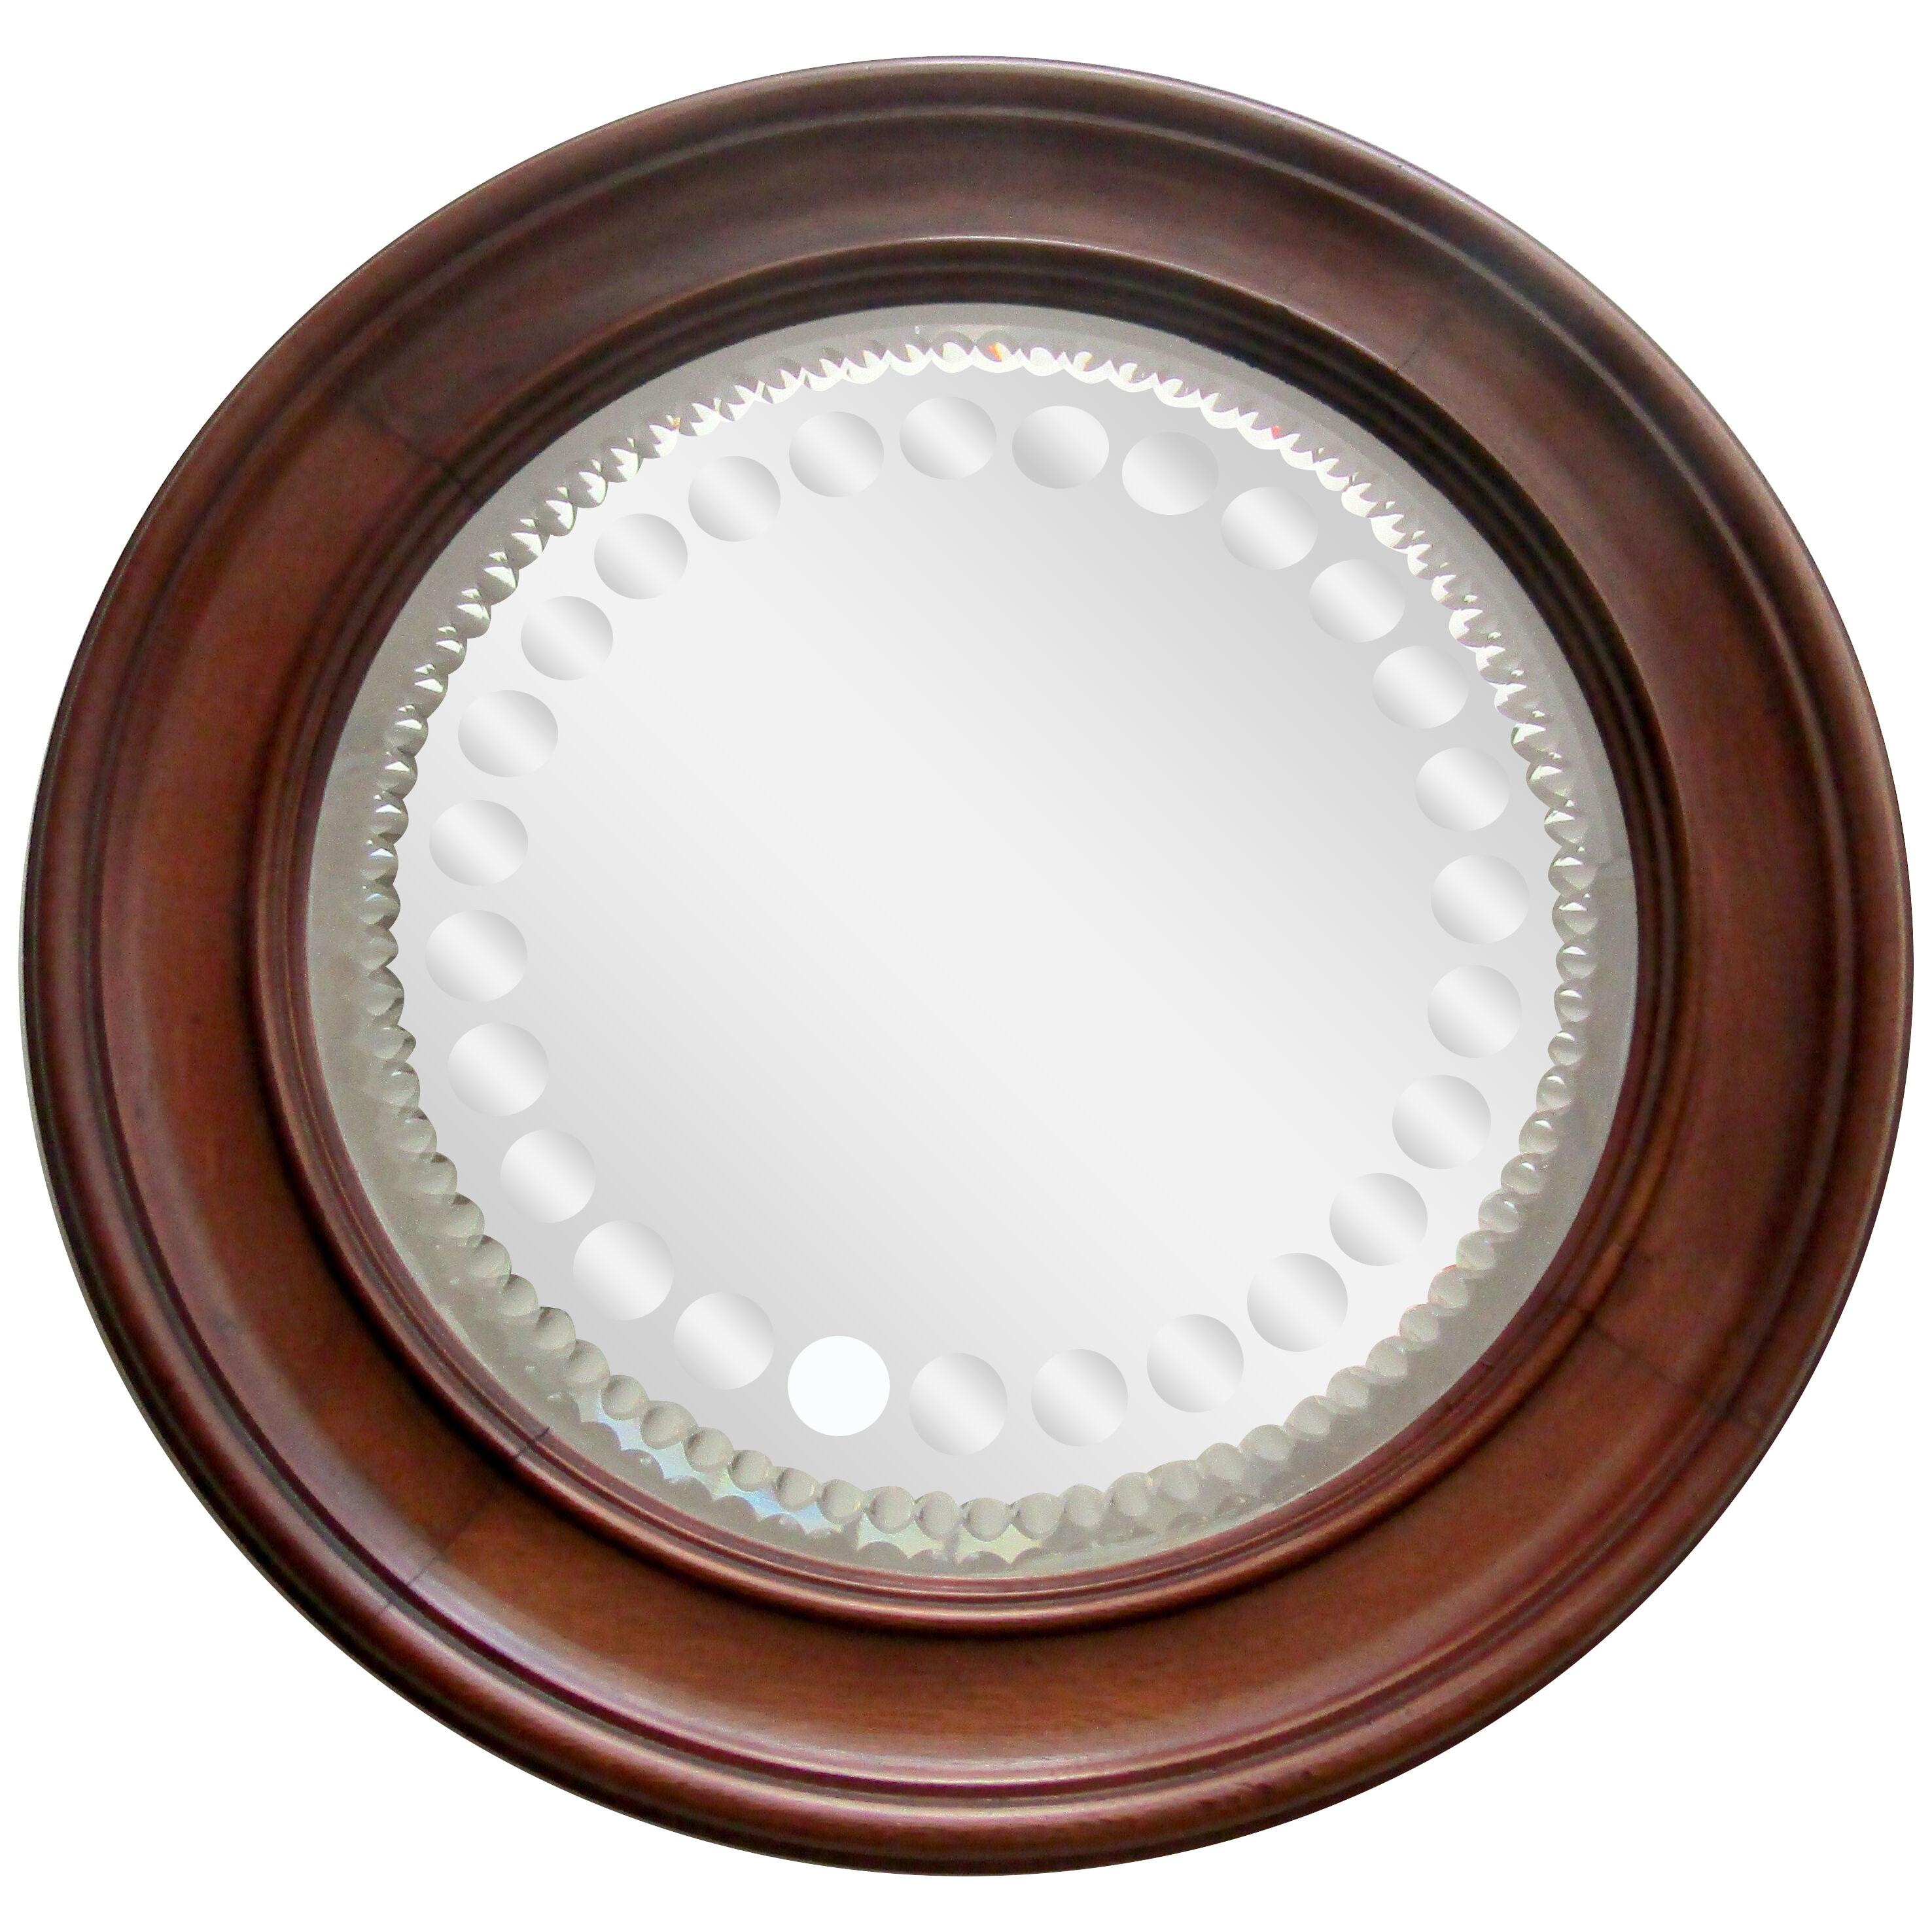 Pair of 1890s Sorcerer’s mirrors